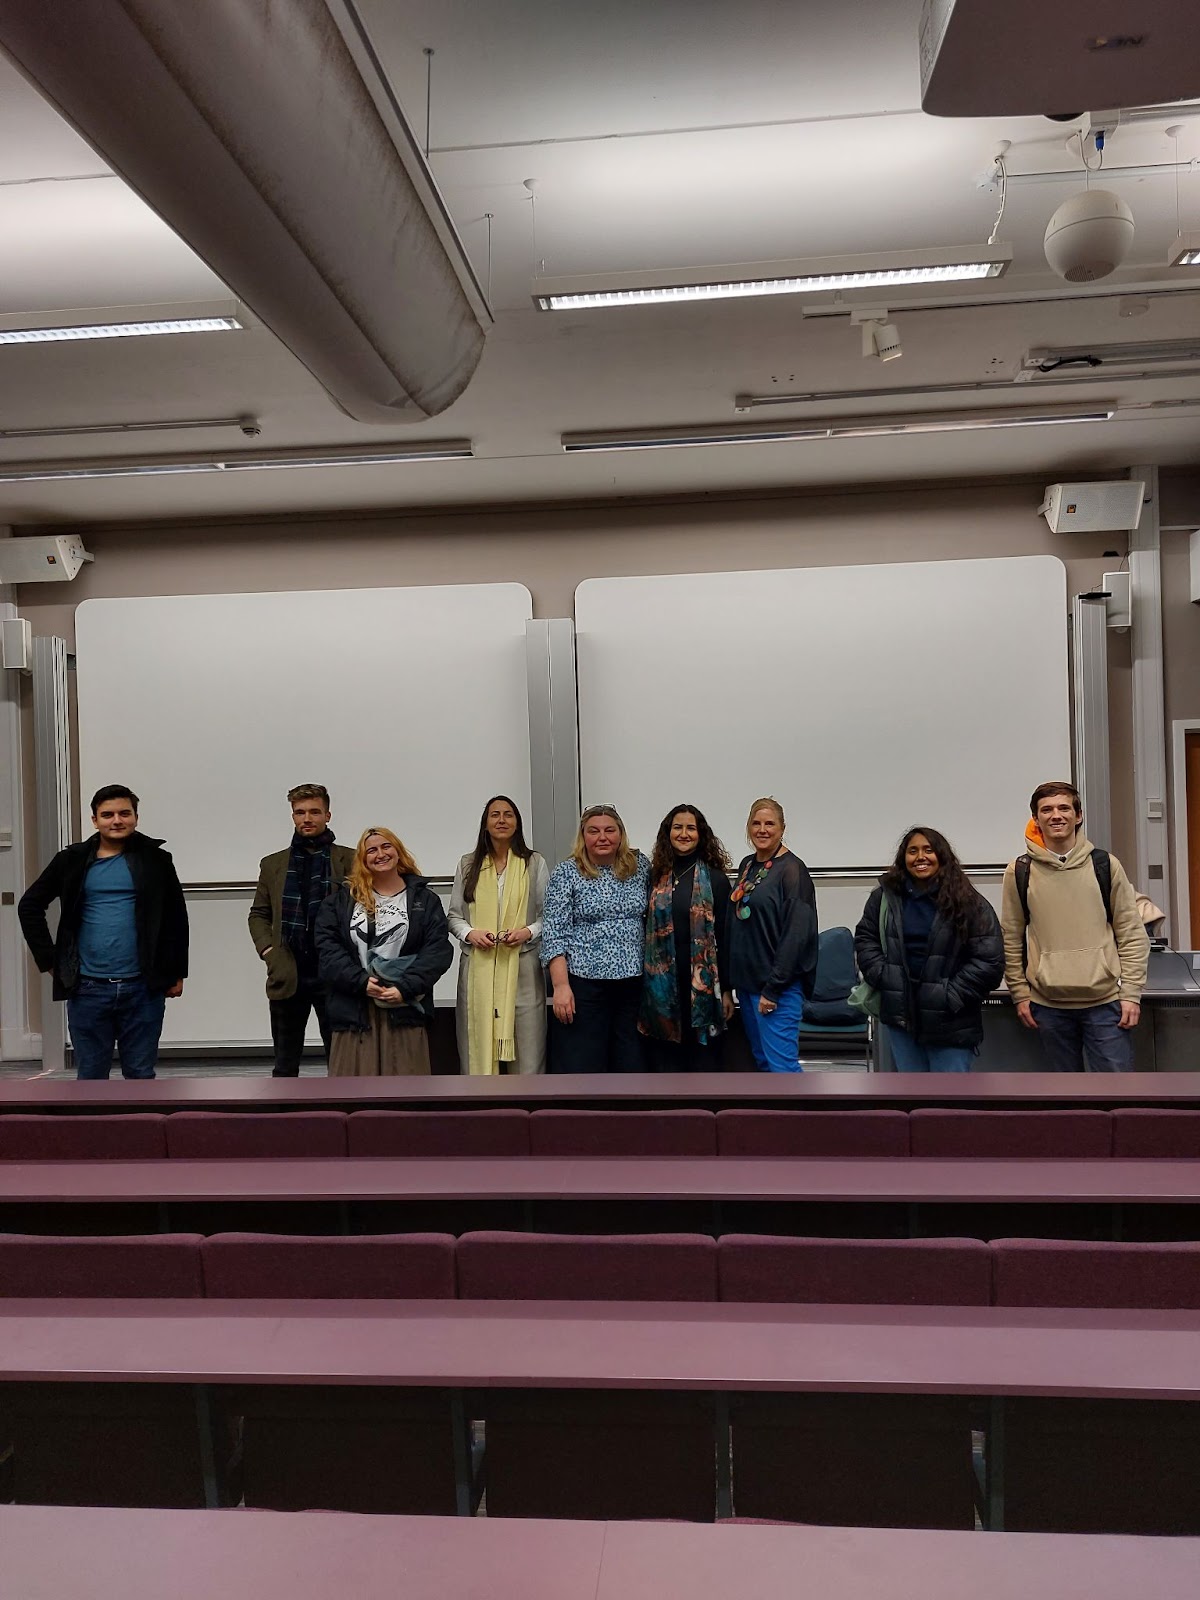 A group of people standing in front of some whiteboards. There are four guest speakers and a number of students